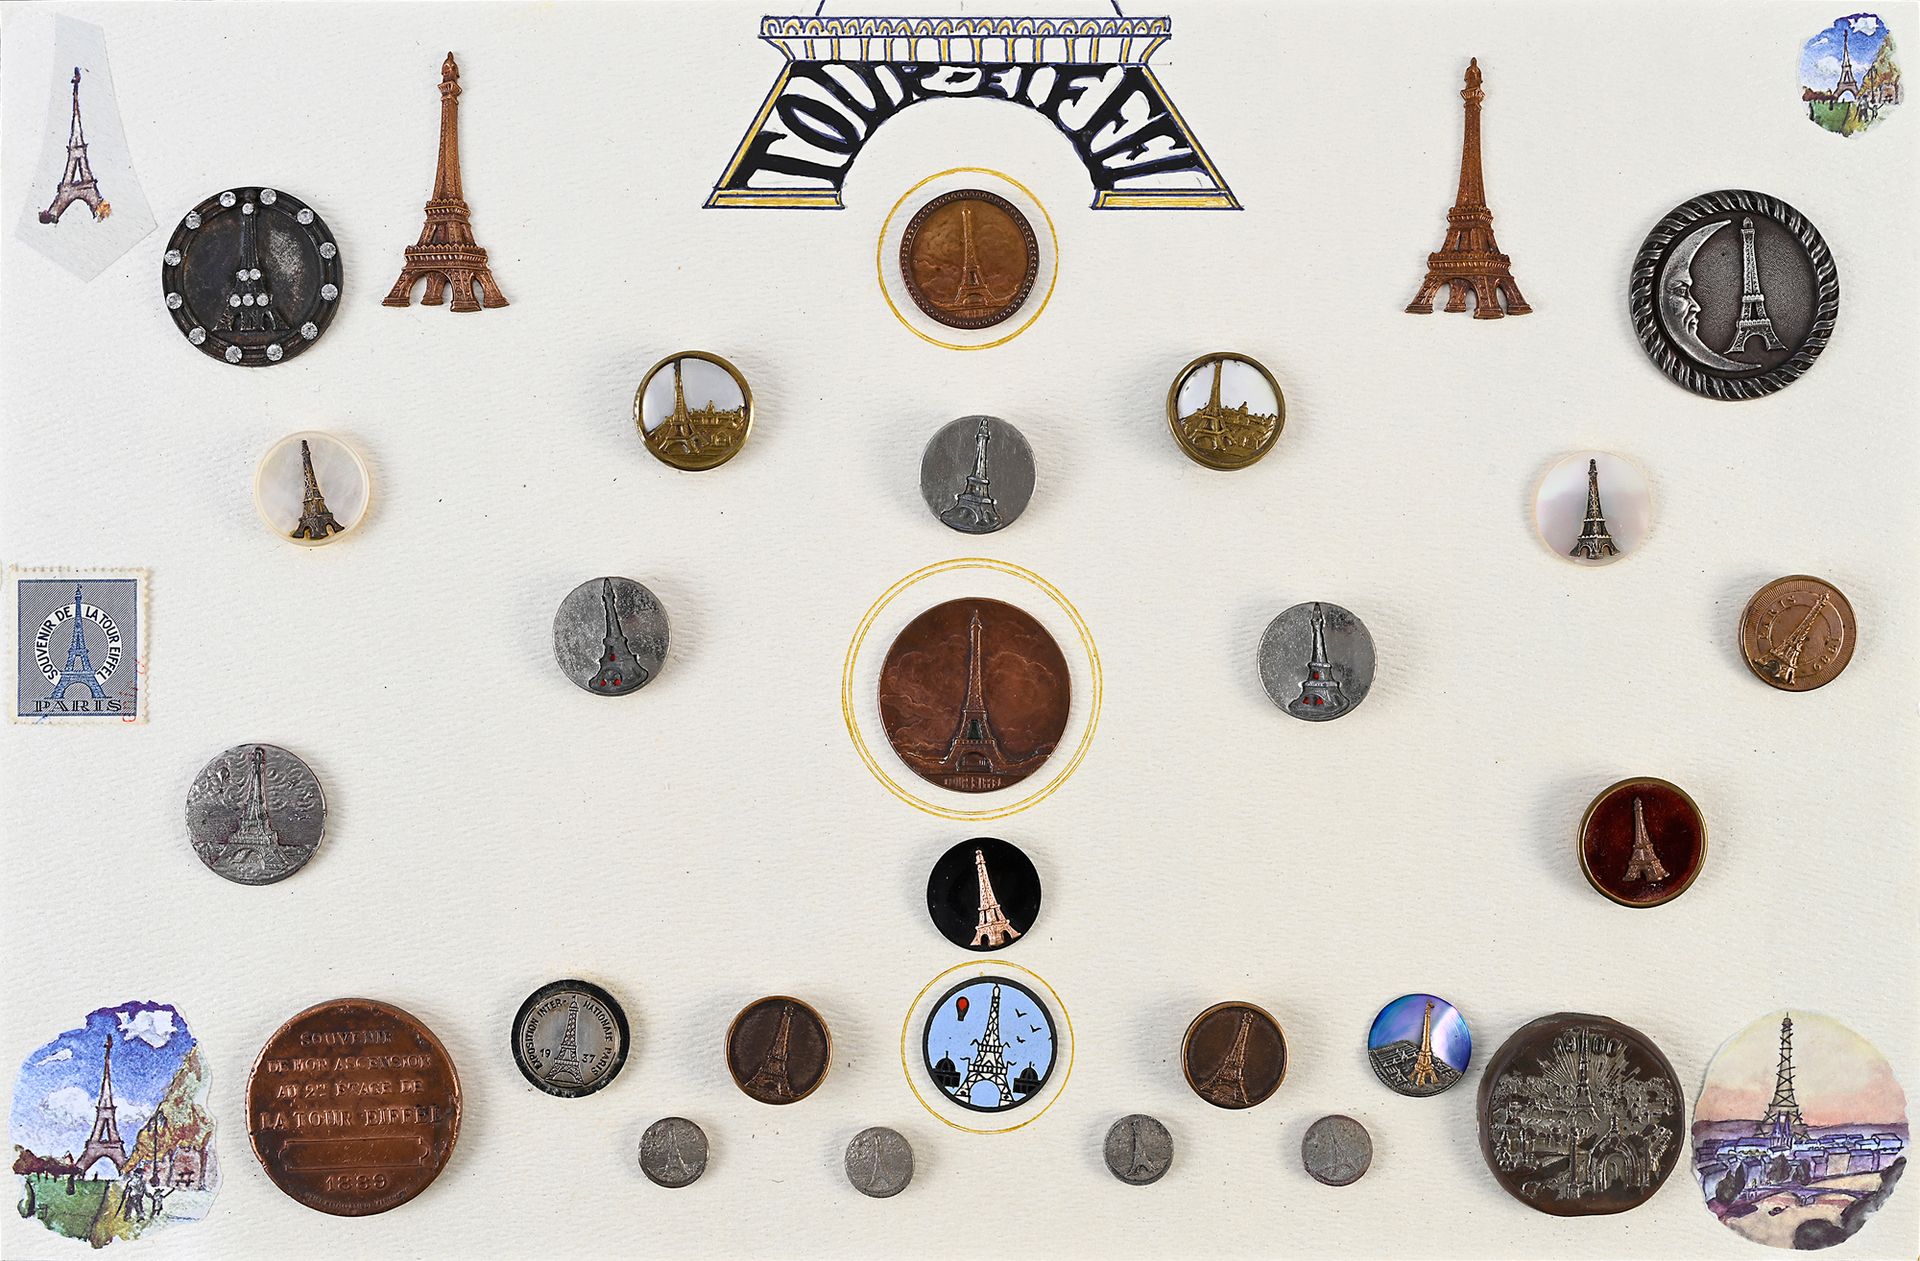 Null Eiffel Tower-themed buttons, circa 1887-1940, set of 8 large buttons and 9 &hellip;